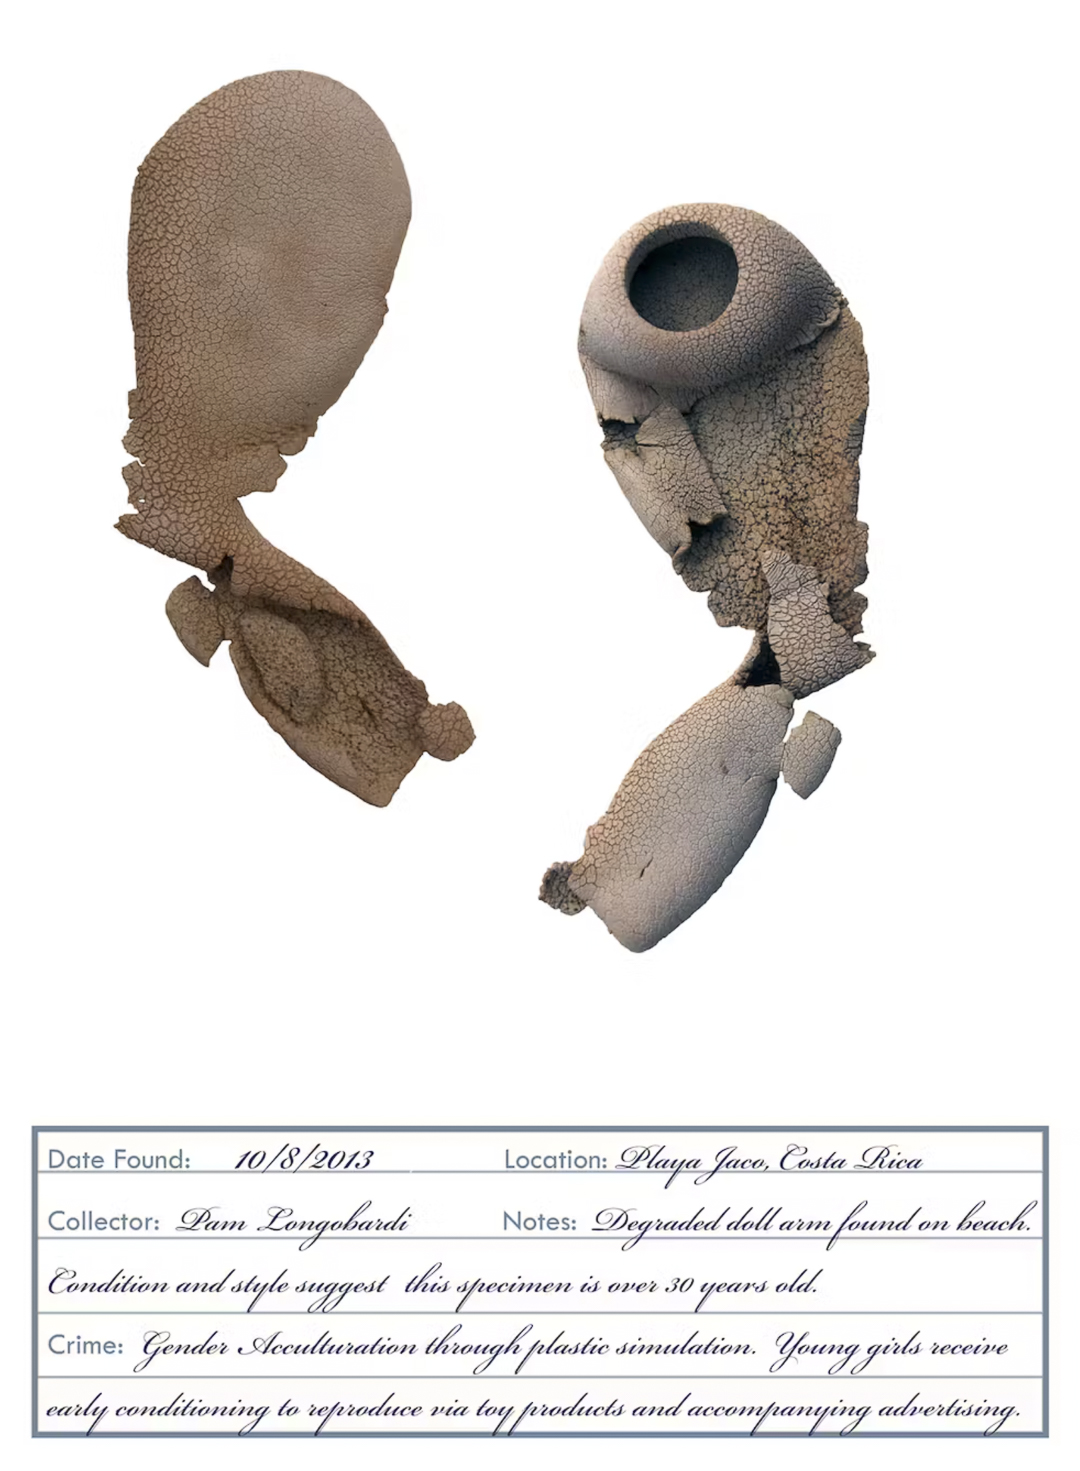 A degraded plastic doll arm, from the series ‘Evidence of Crimes.’ (by Pam Longobardi, CC BY-ND via the Conversation).